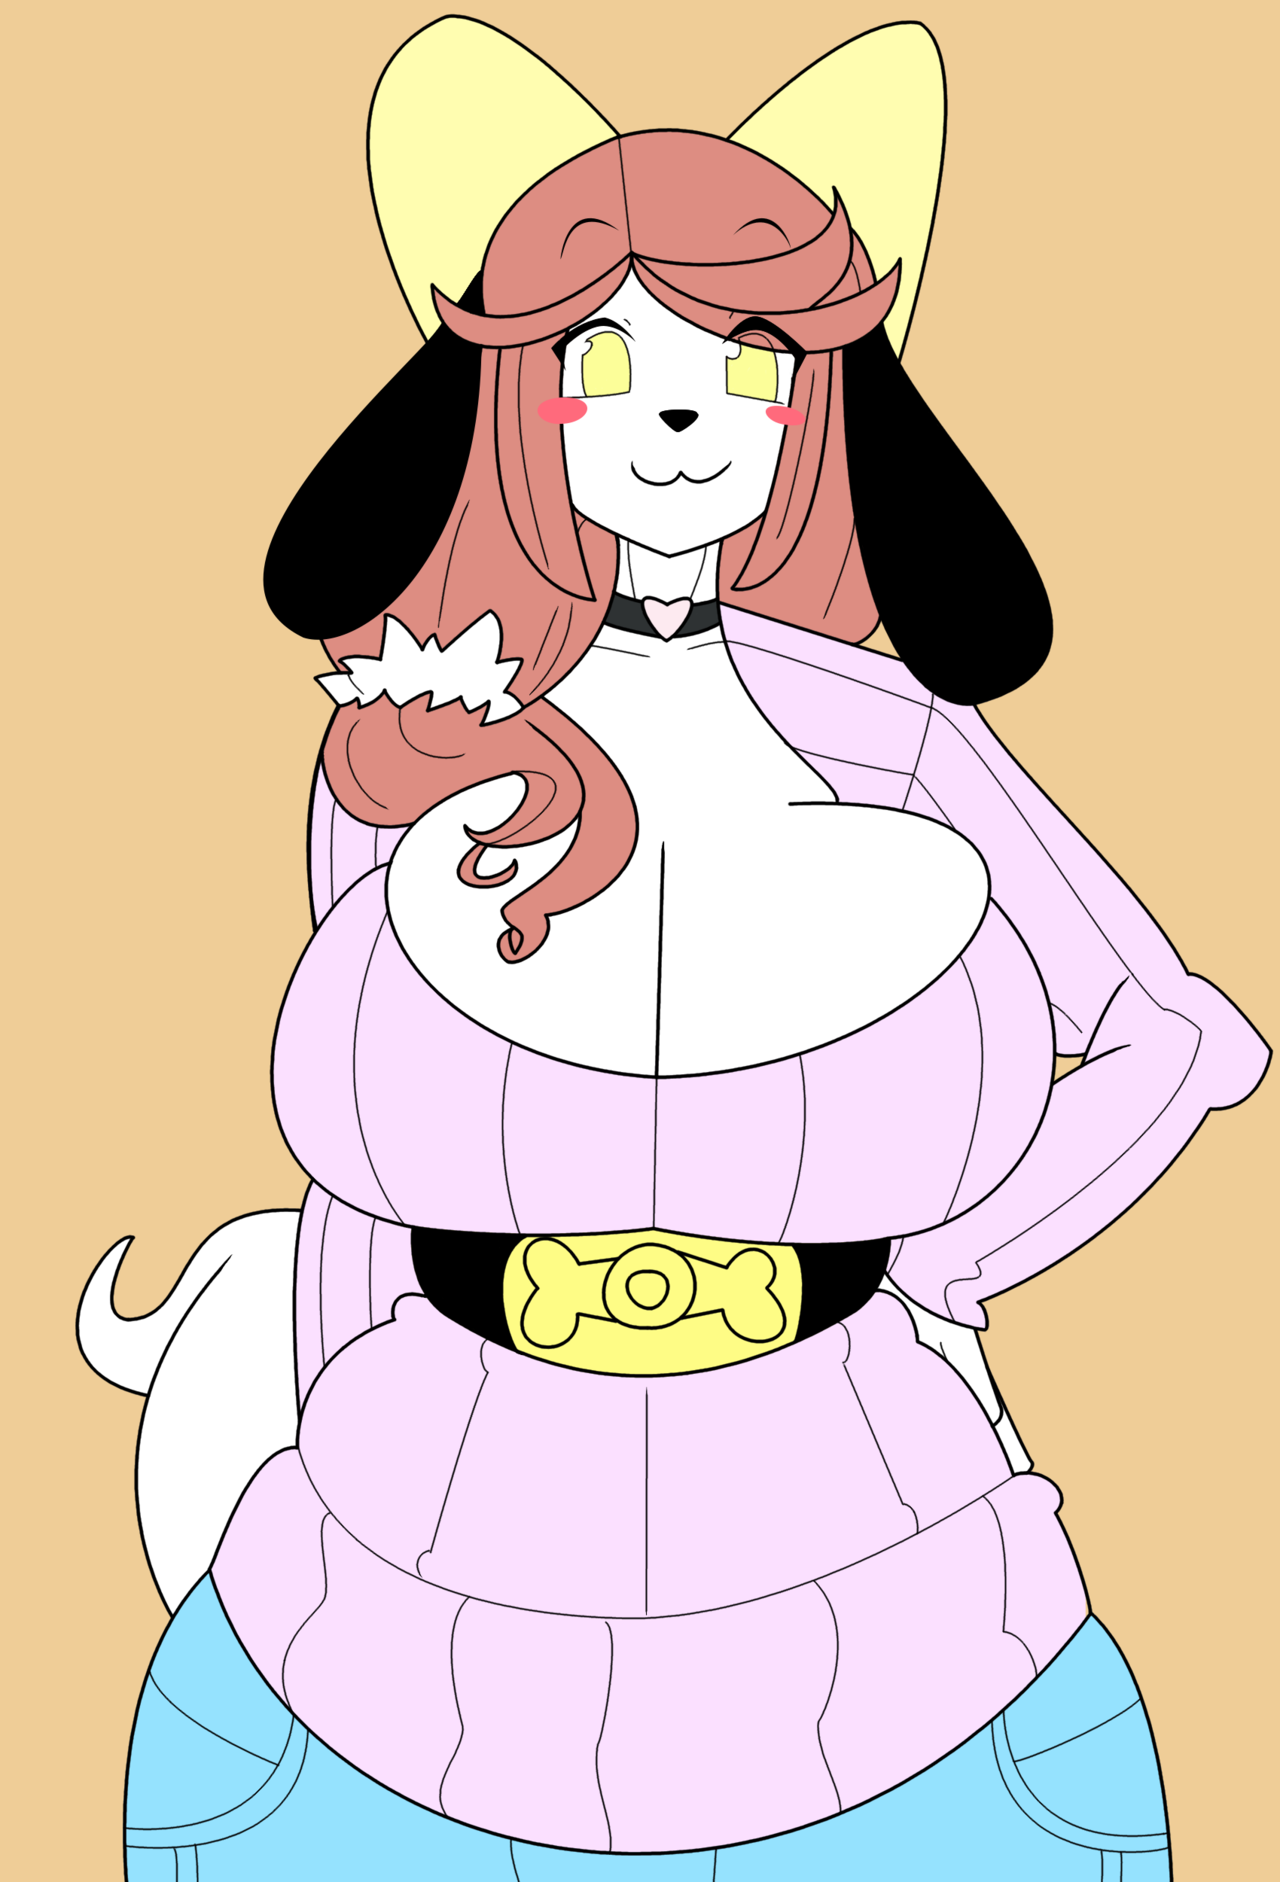 theycallhimcake:  lucedo725: For Mother’s Day, I drew another dog mom for Year